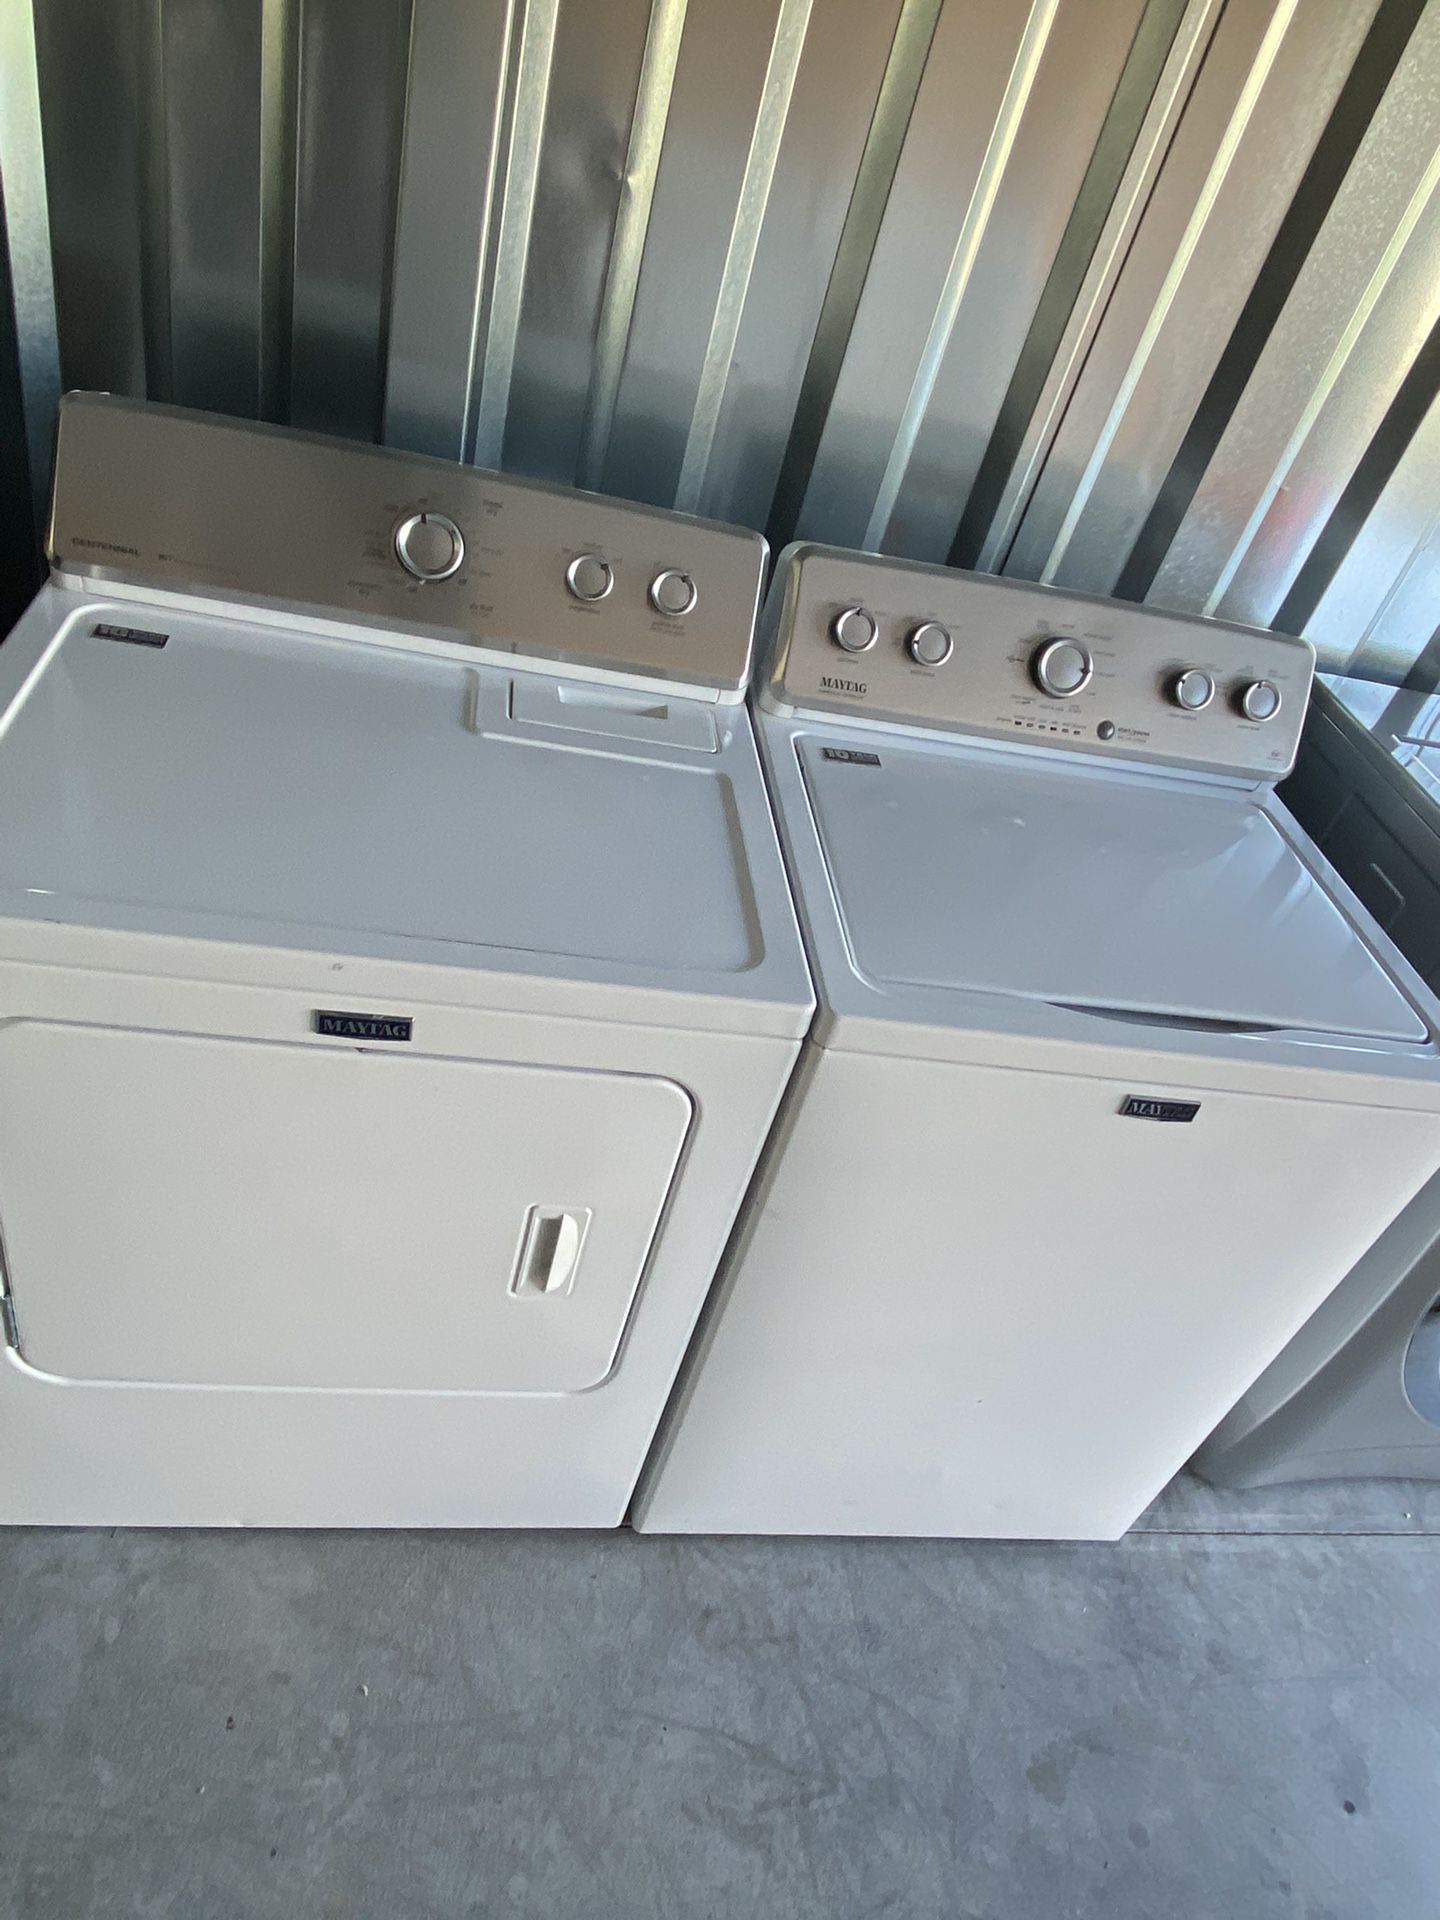 Maytag Washer And Dryer With 30 Day Warranty